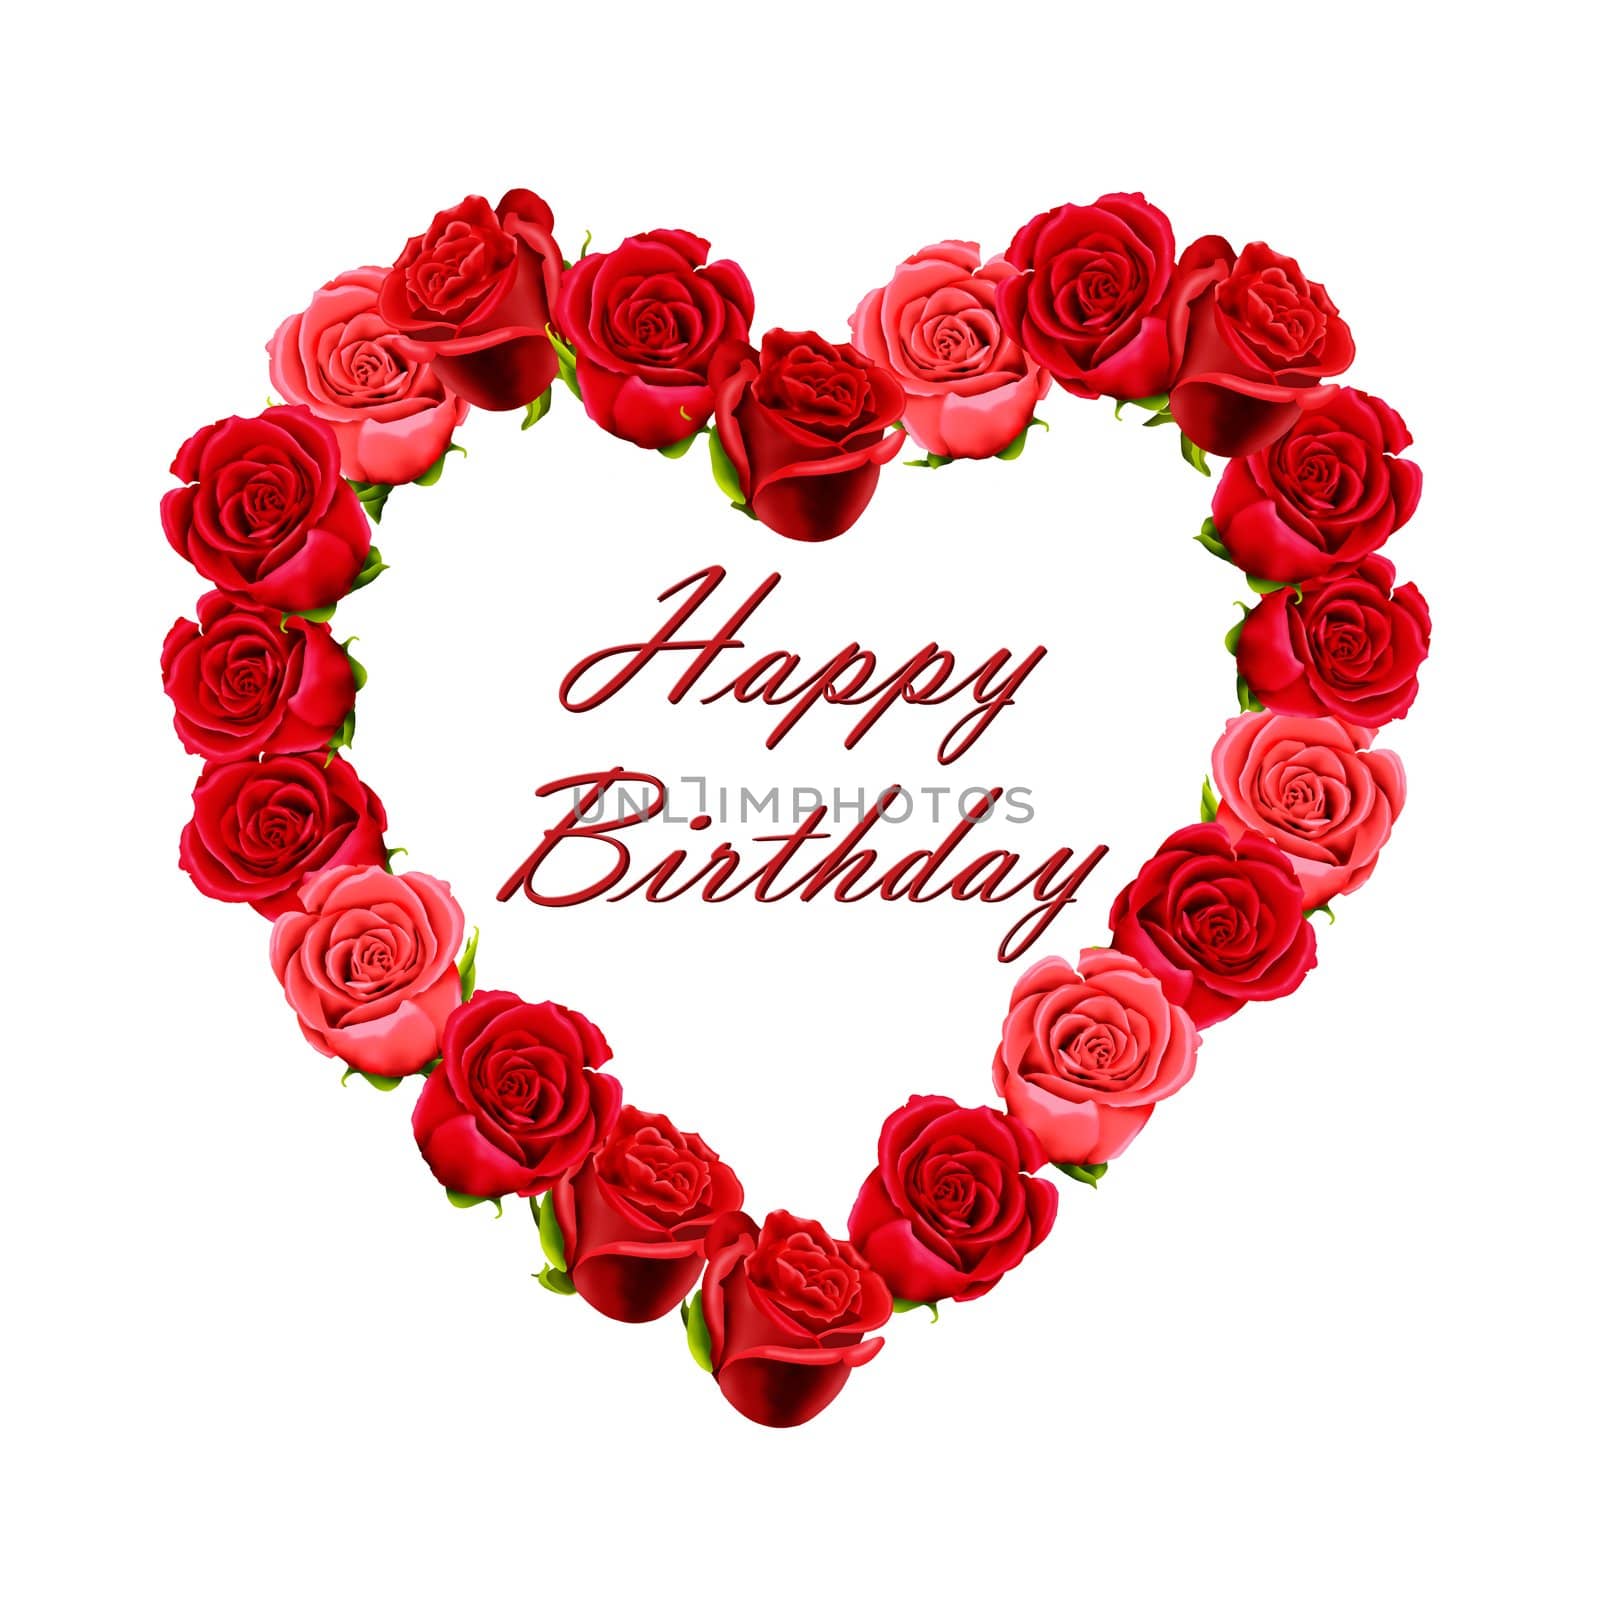 Birthday card with a heart made of red roses, isolated on a white background